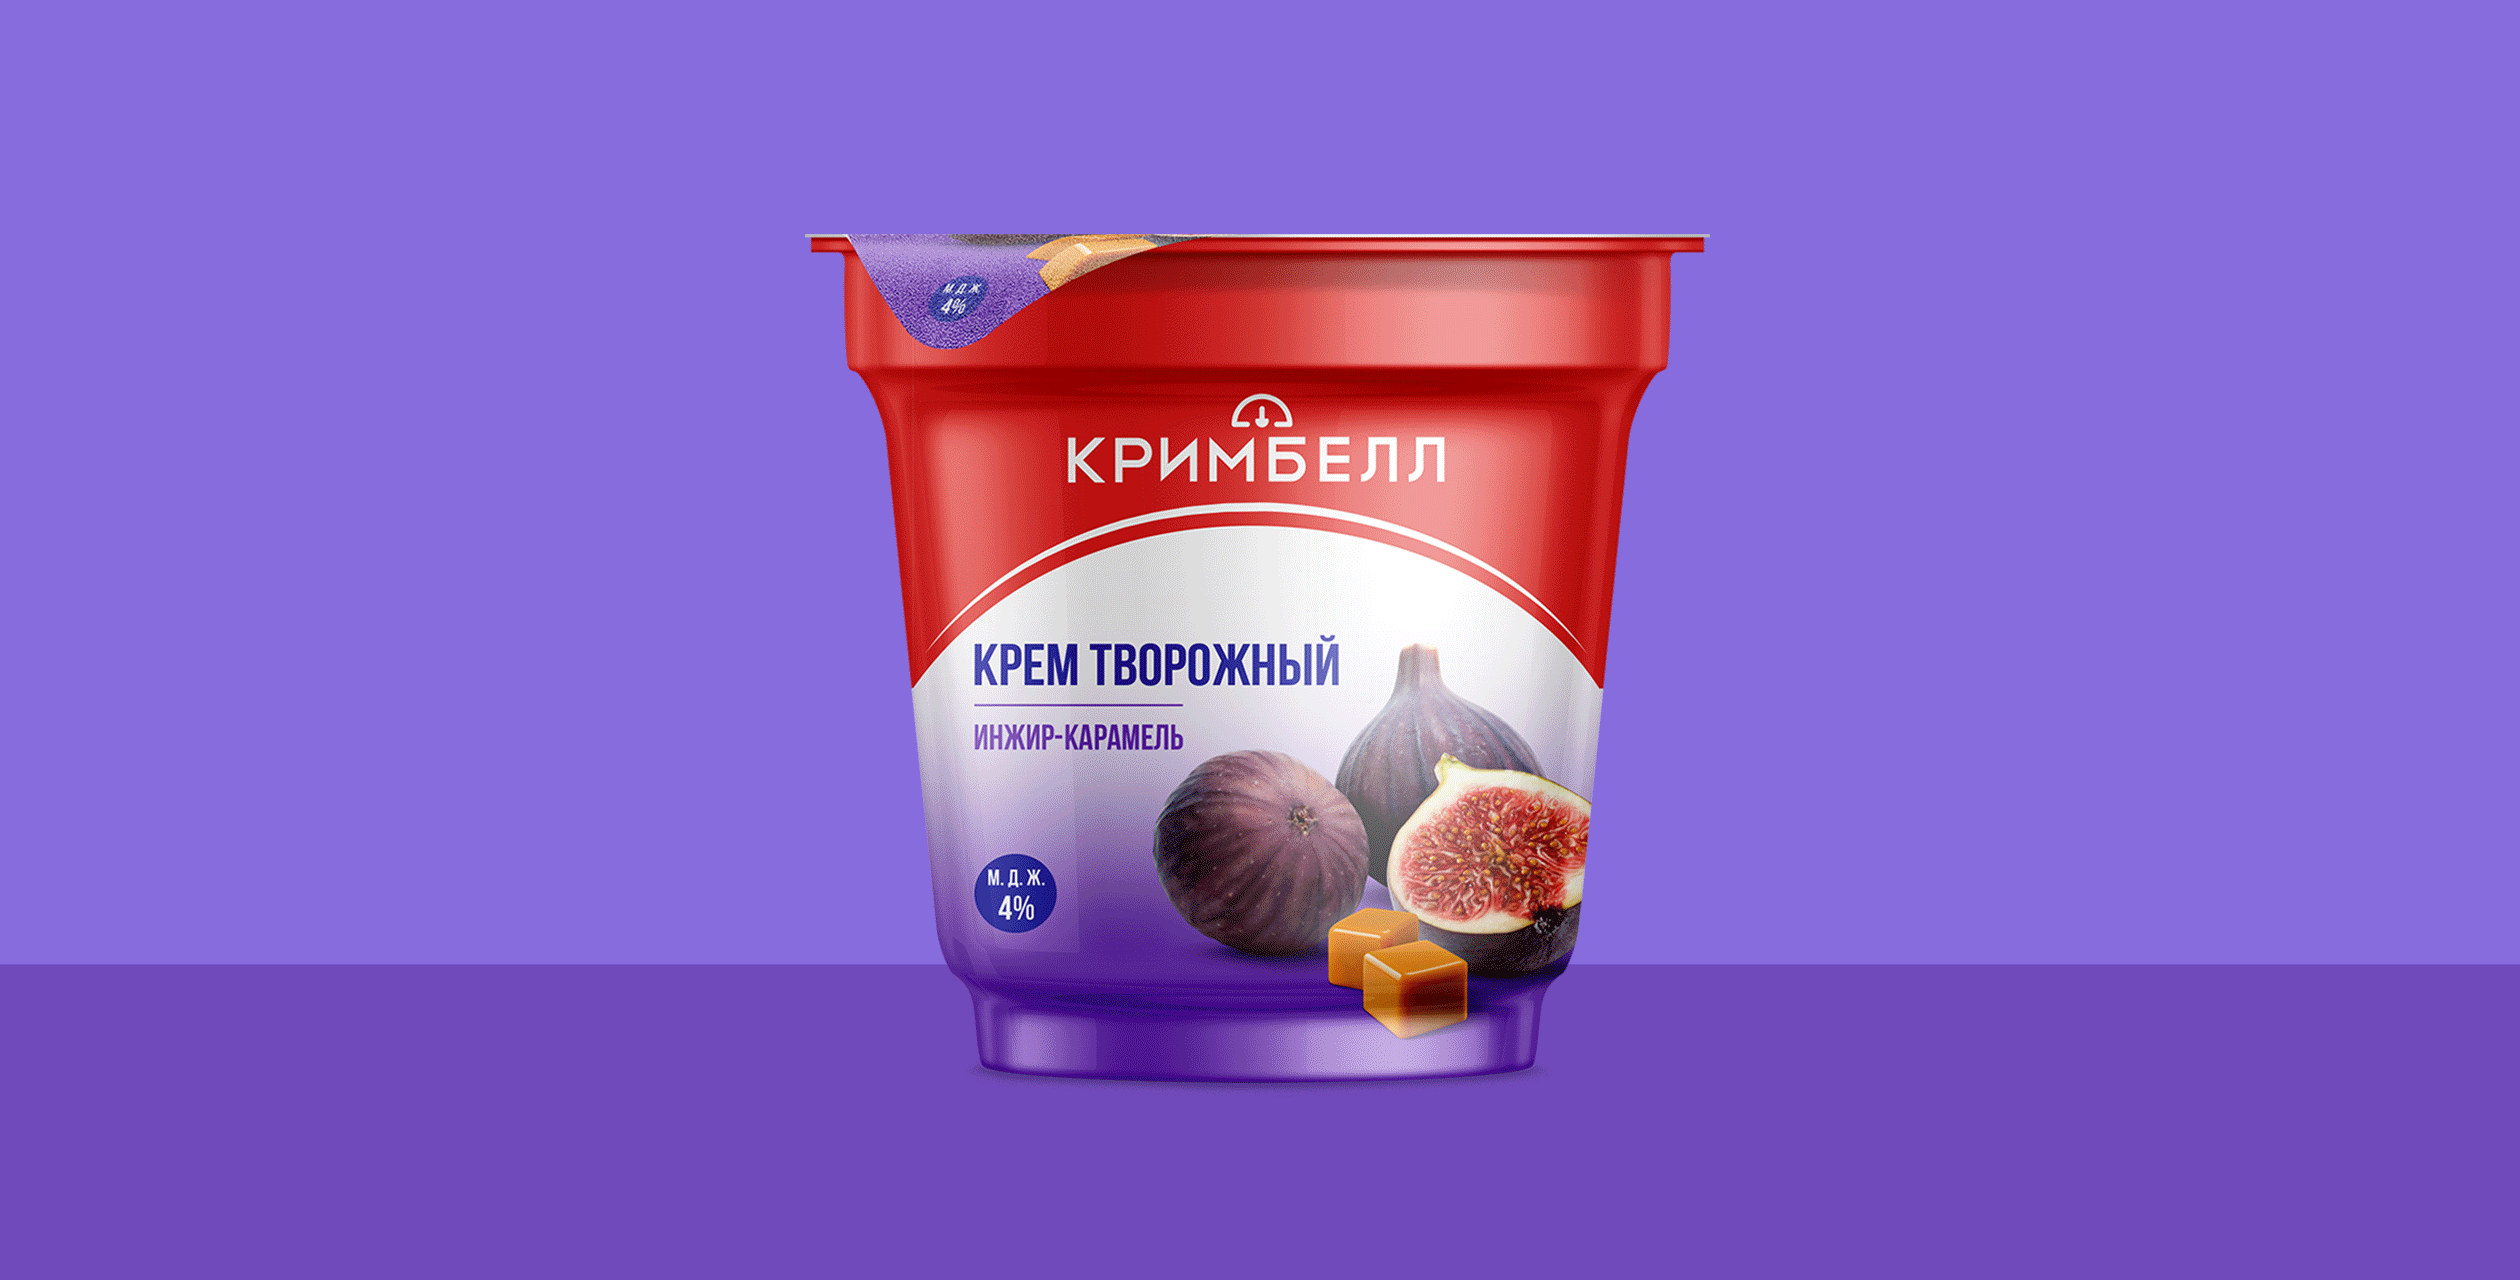 15. Creambell-Russia Dairy